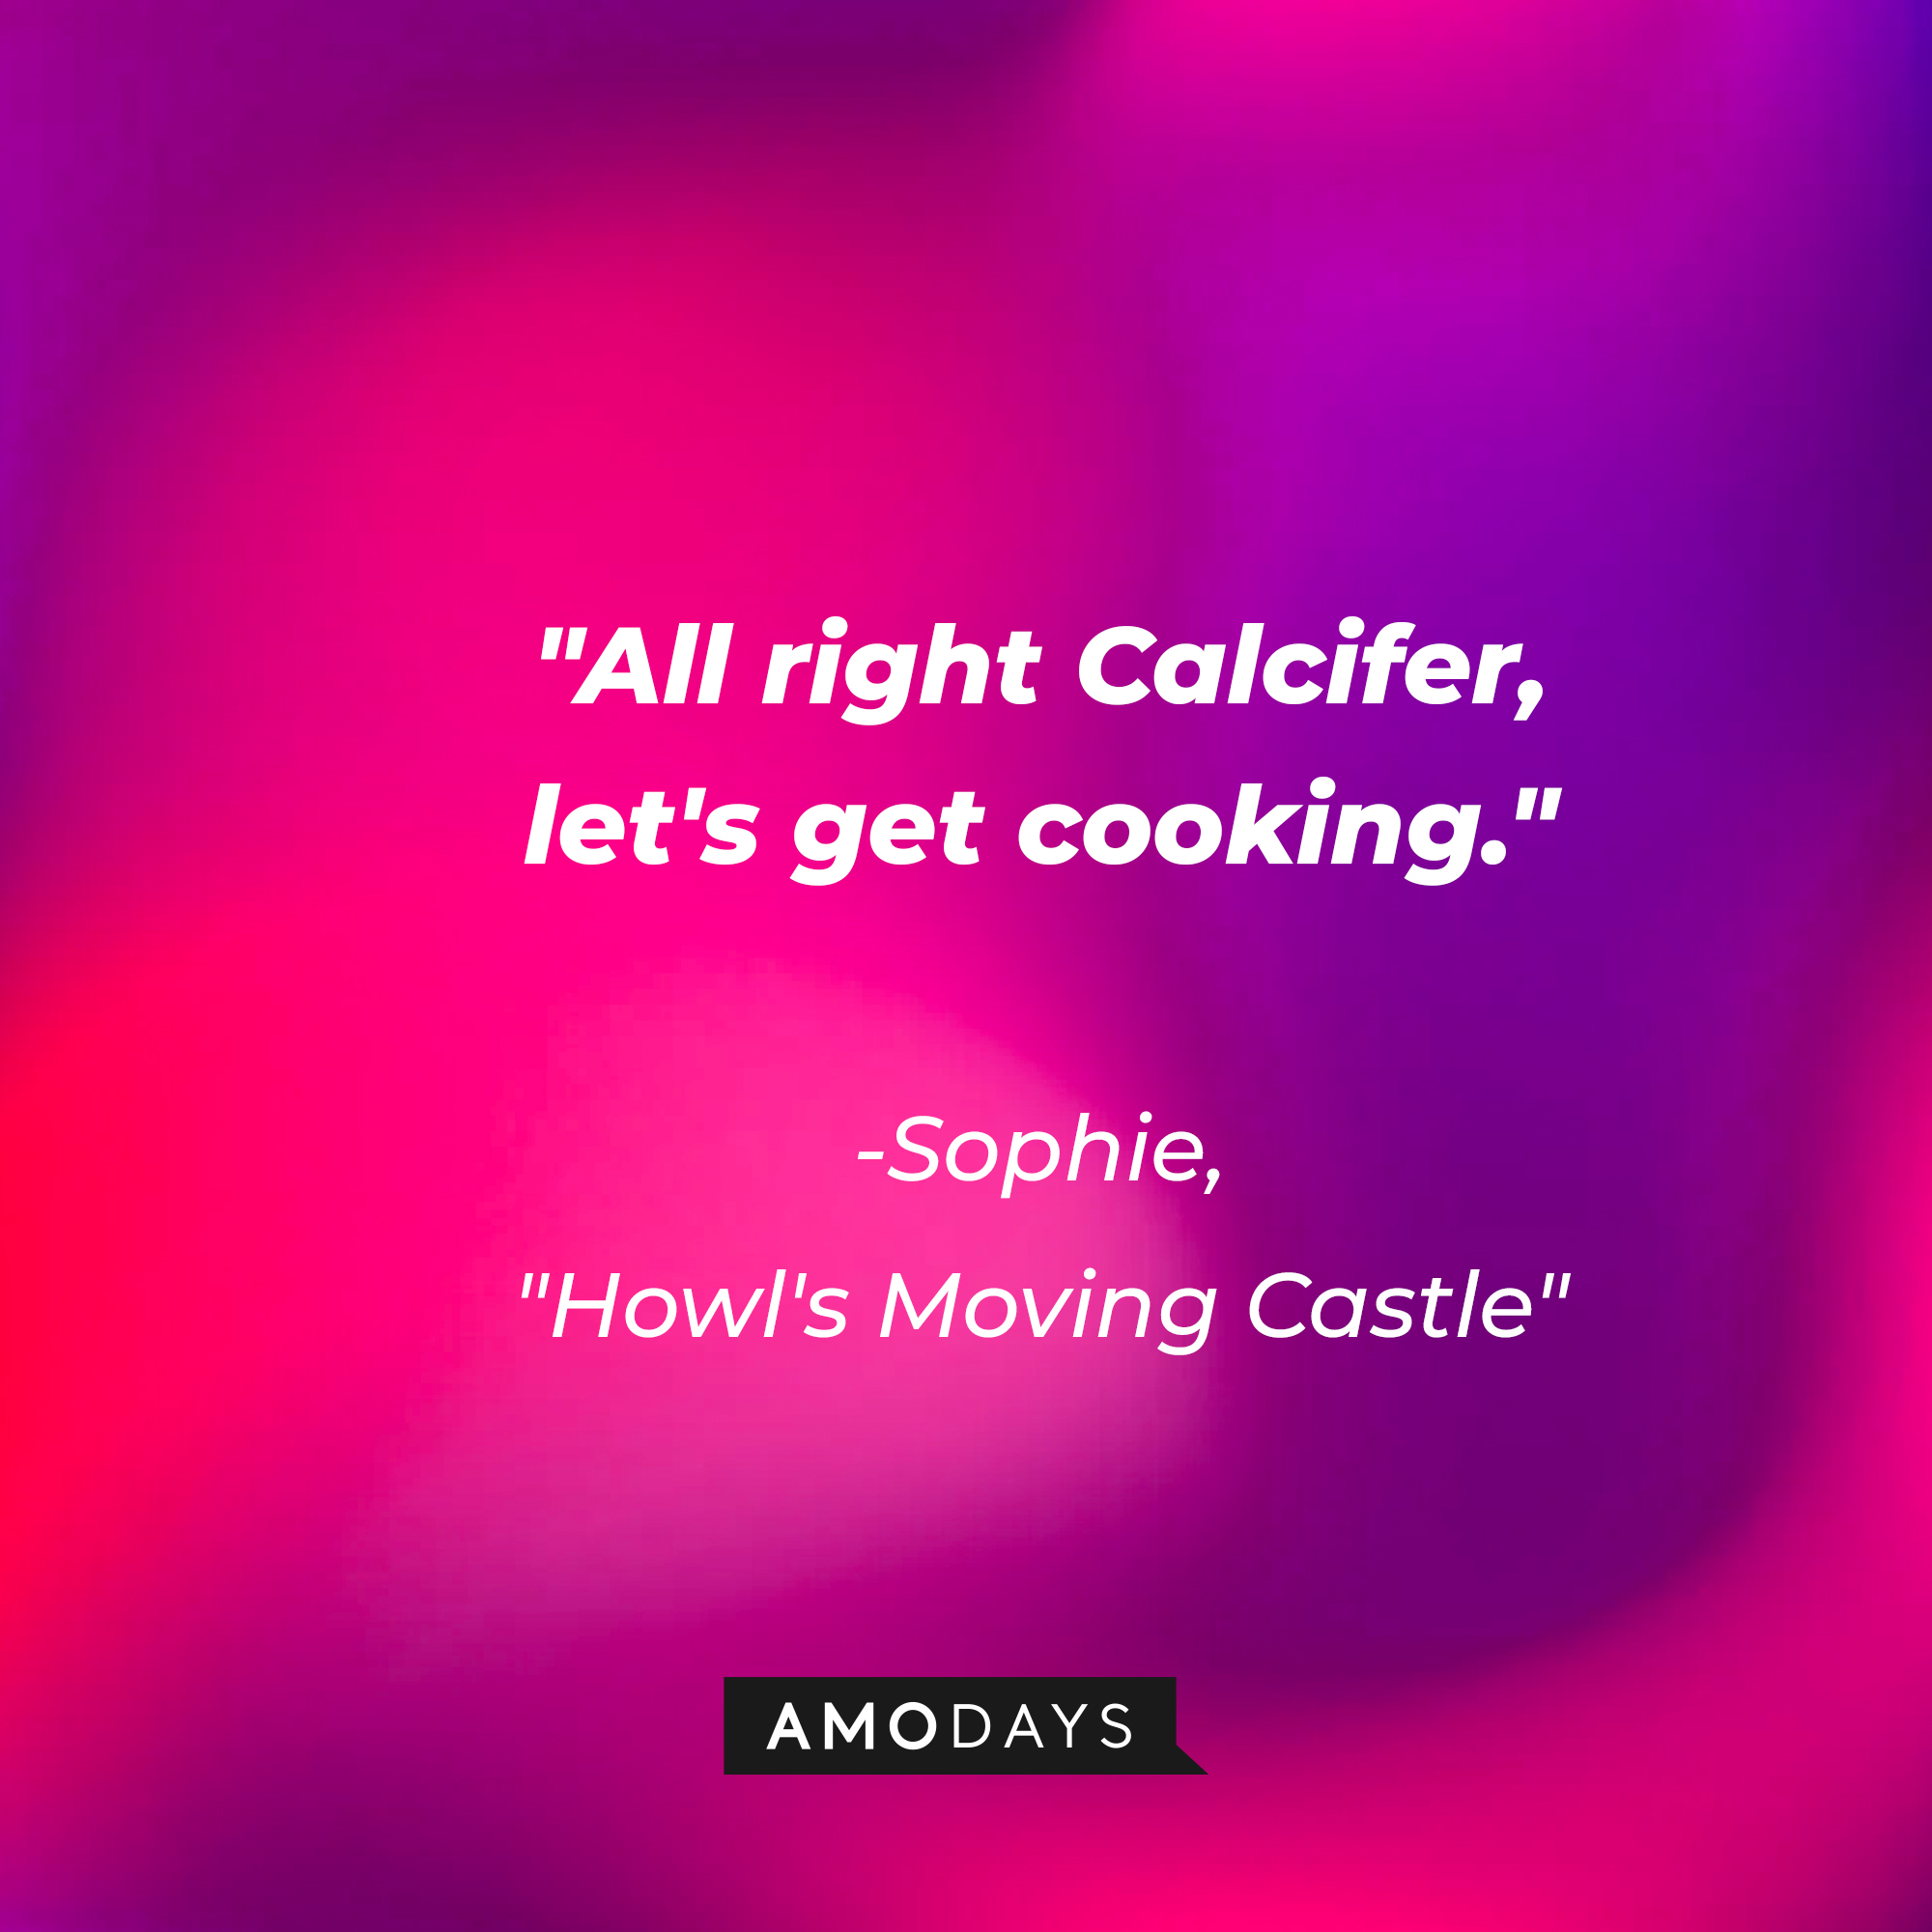 Sophie's quote in "Howl's Moving Castle:" "All right Calcifer, let's get cooking." | Source: AmoDays